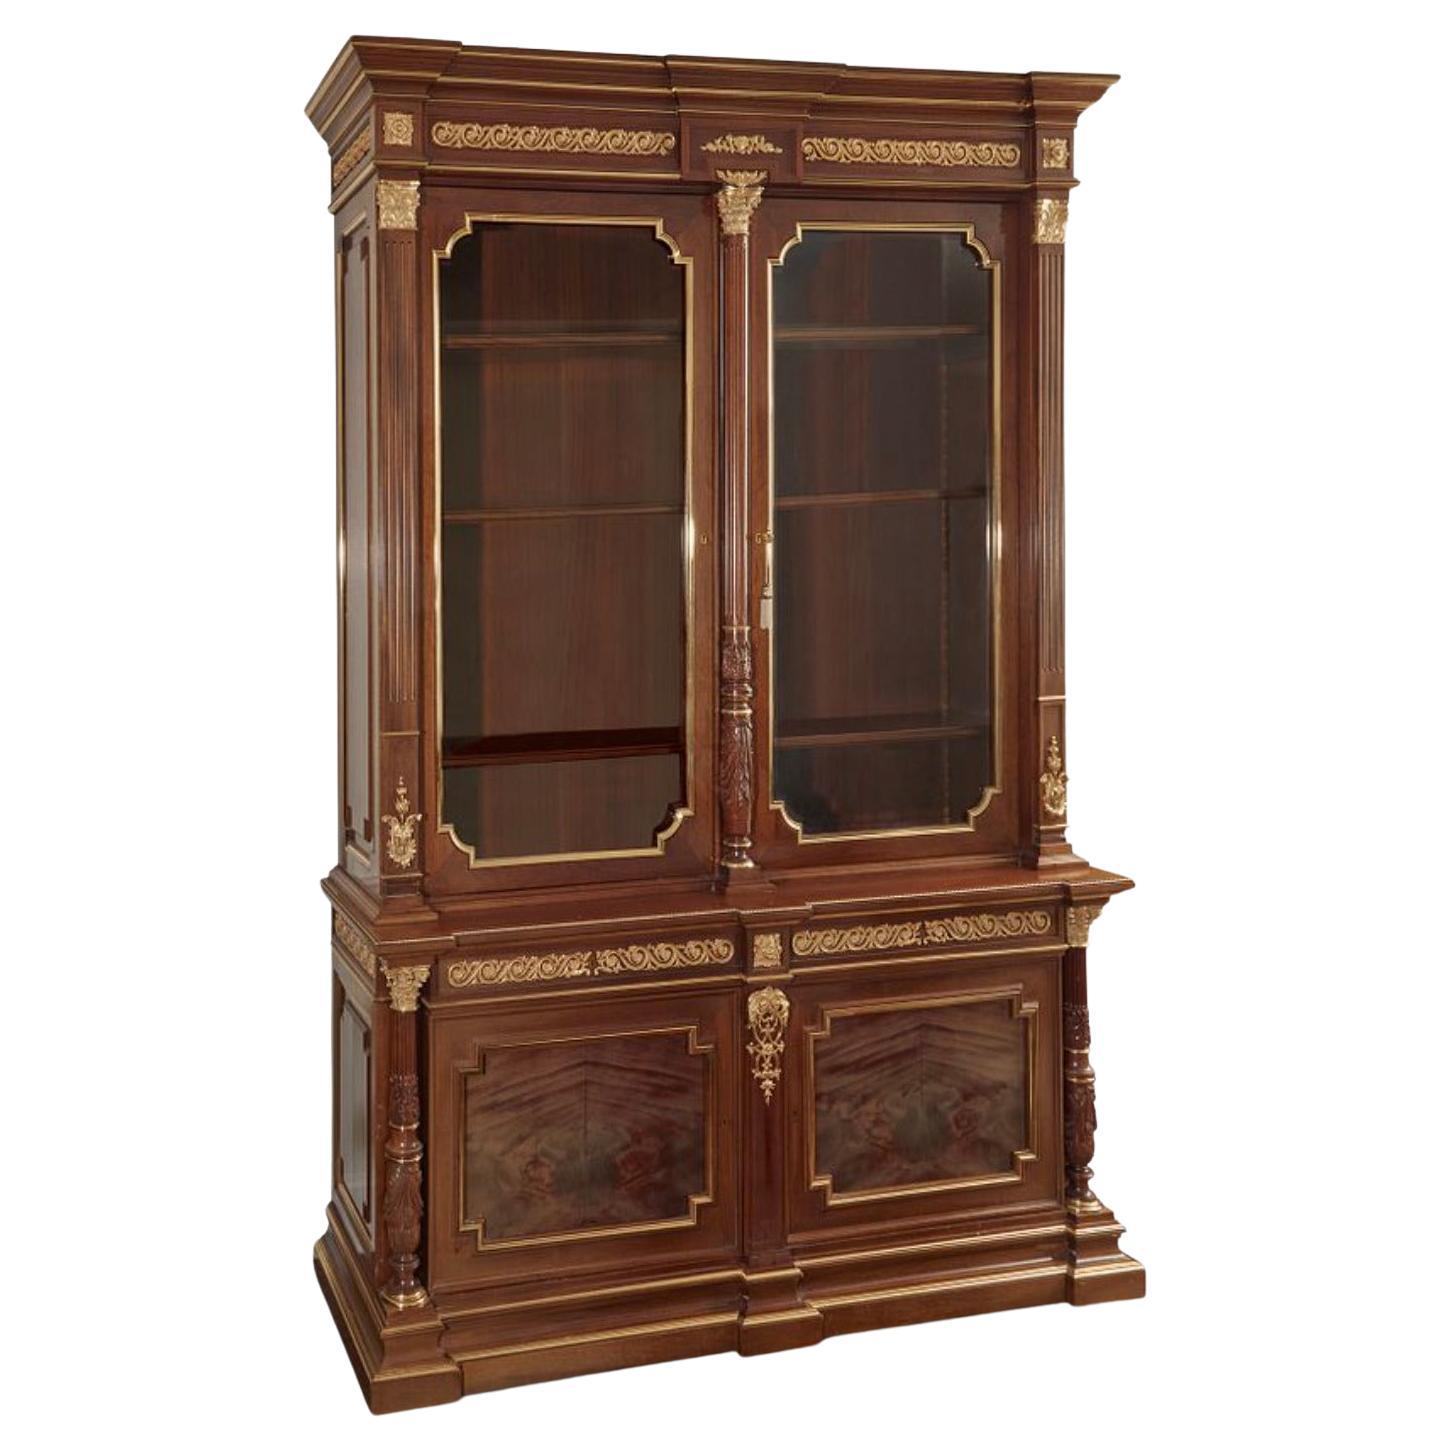 A Fine Louis XVI Style Gilt-Bronze Mounted Mahogany Bookcase Bibliotheque For Sale